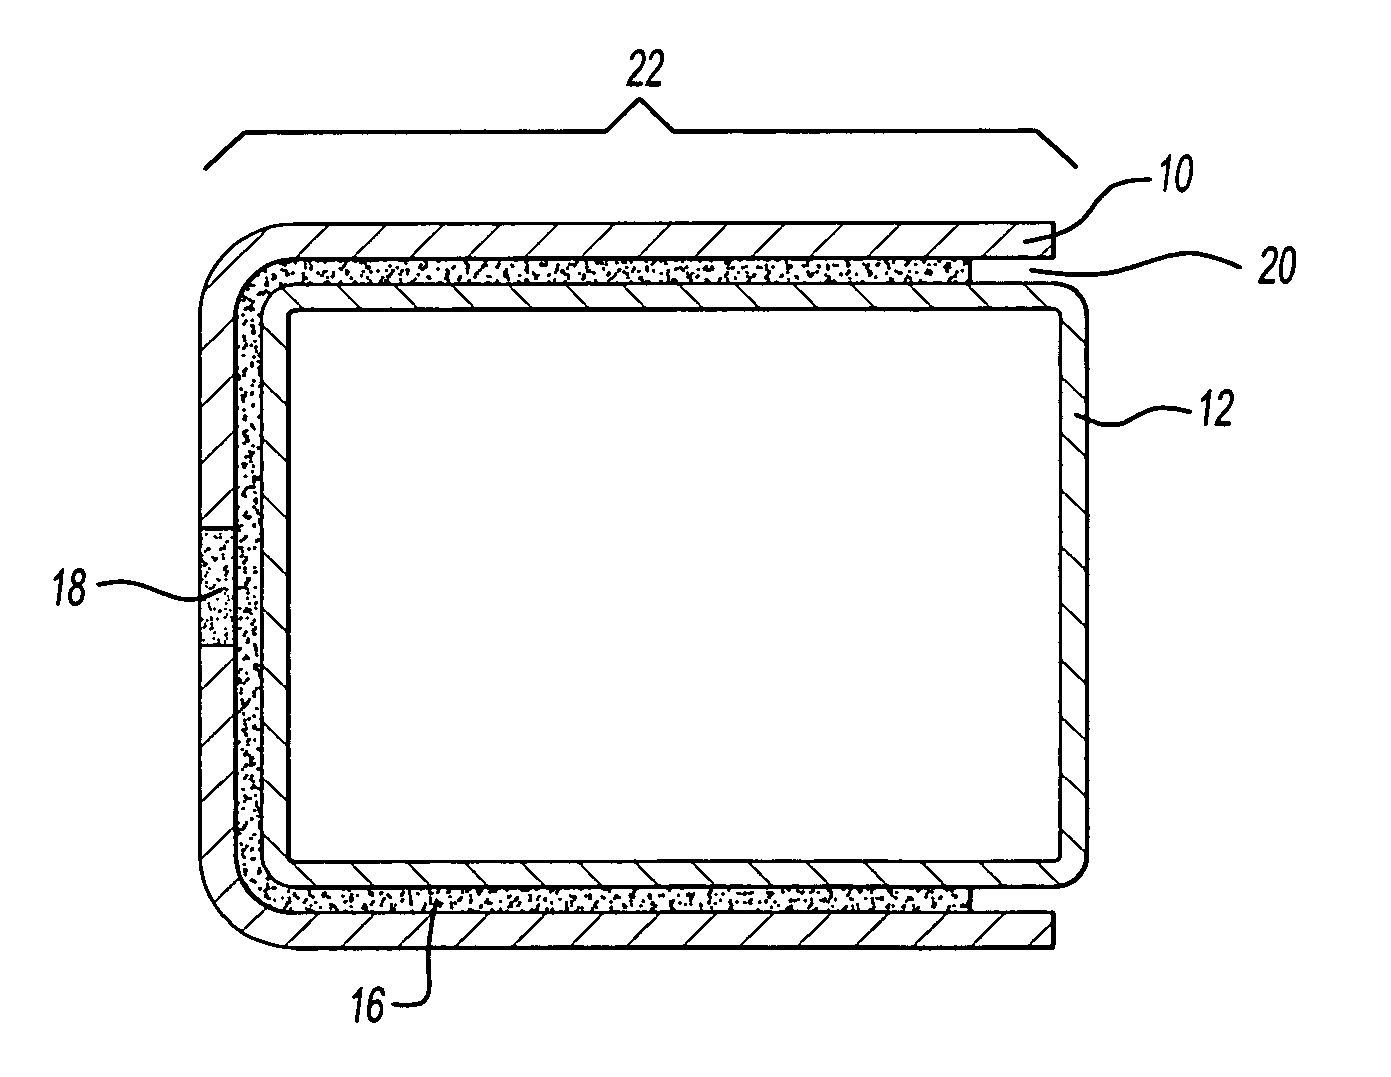 Method of attaching components and article formed using same